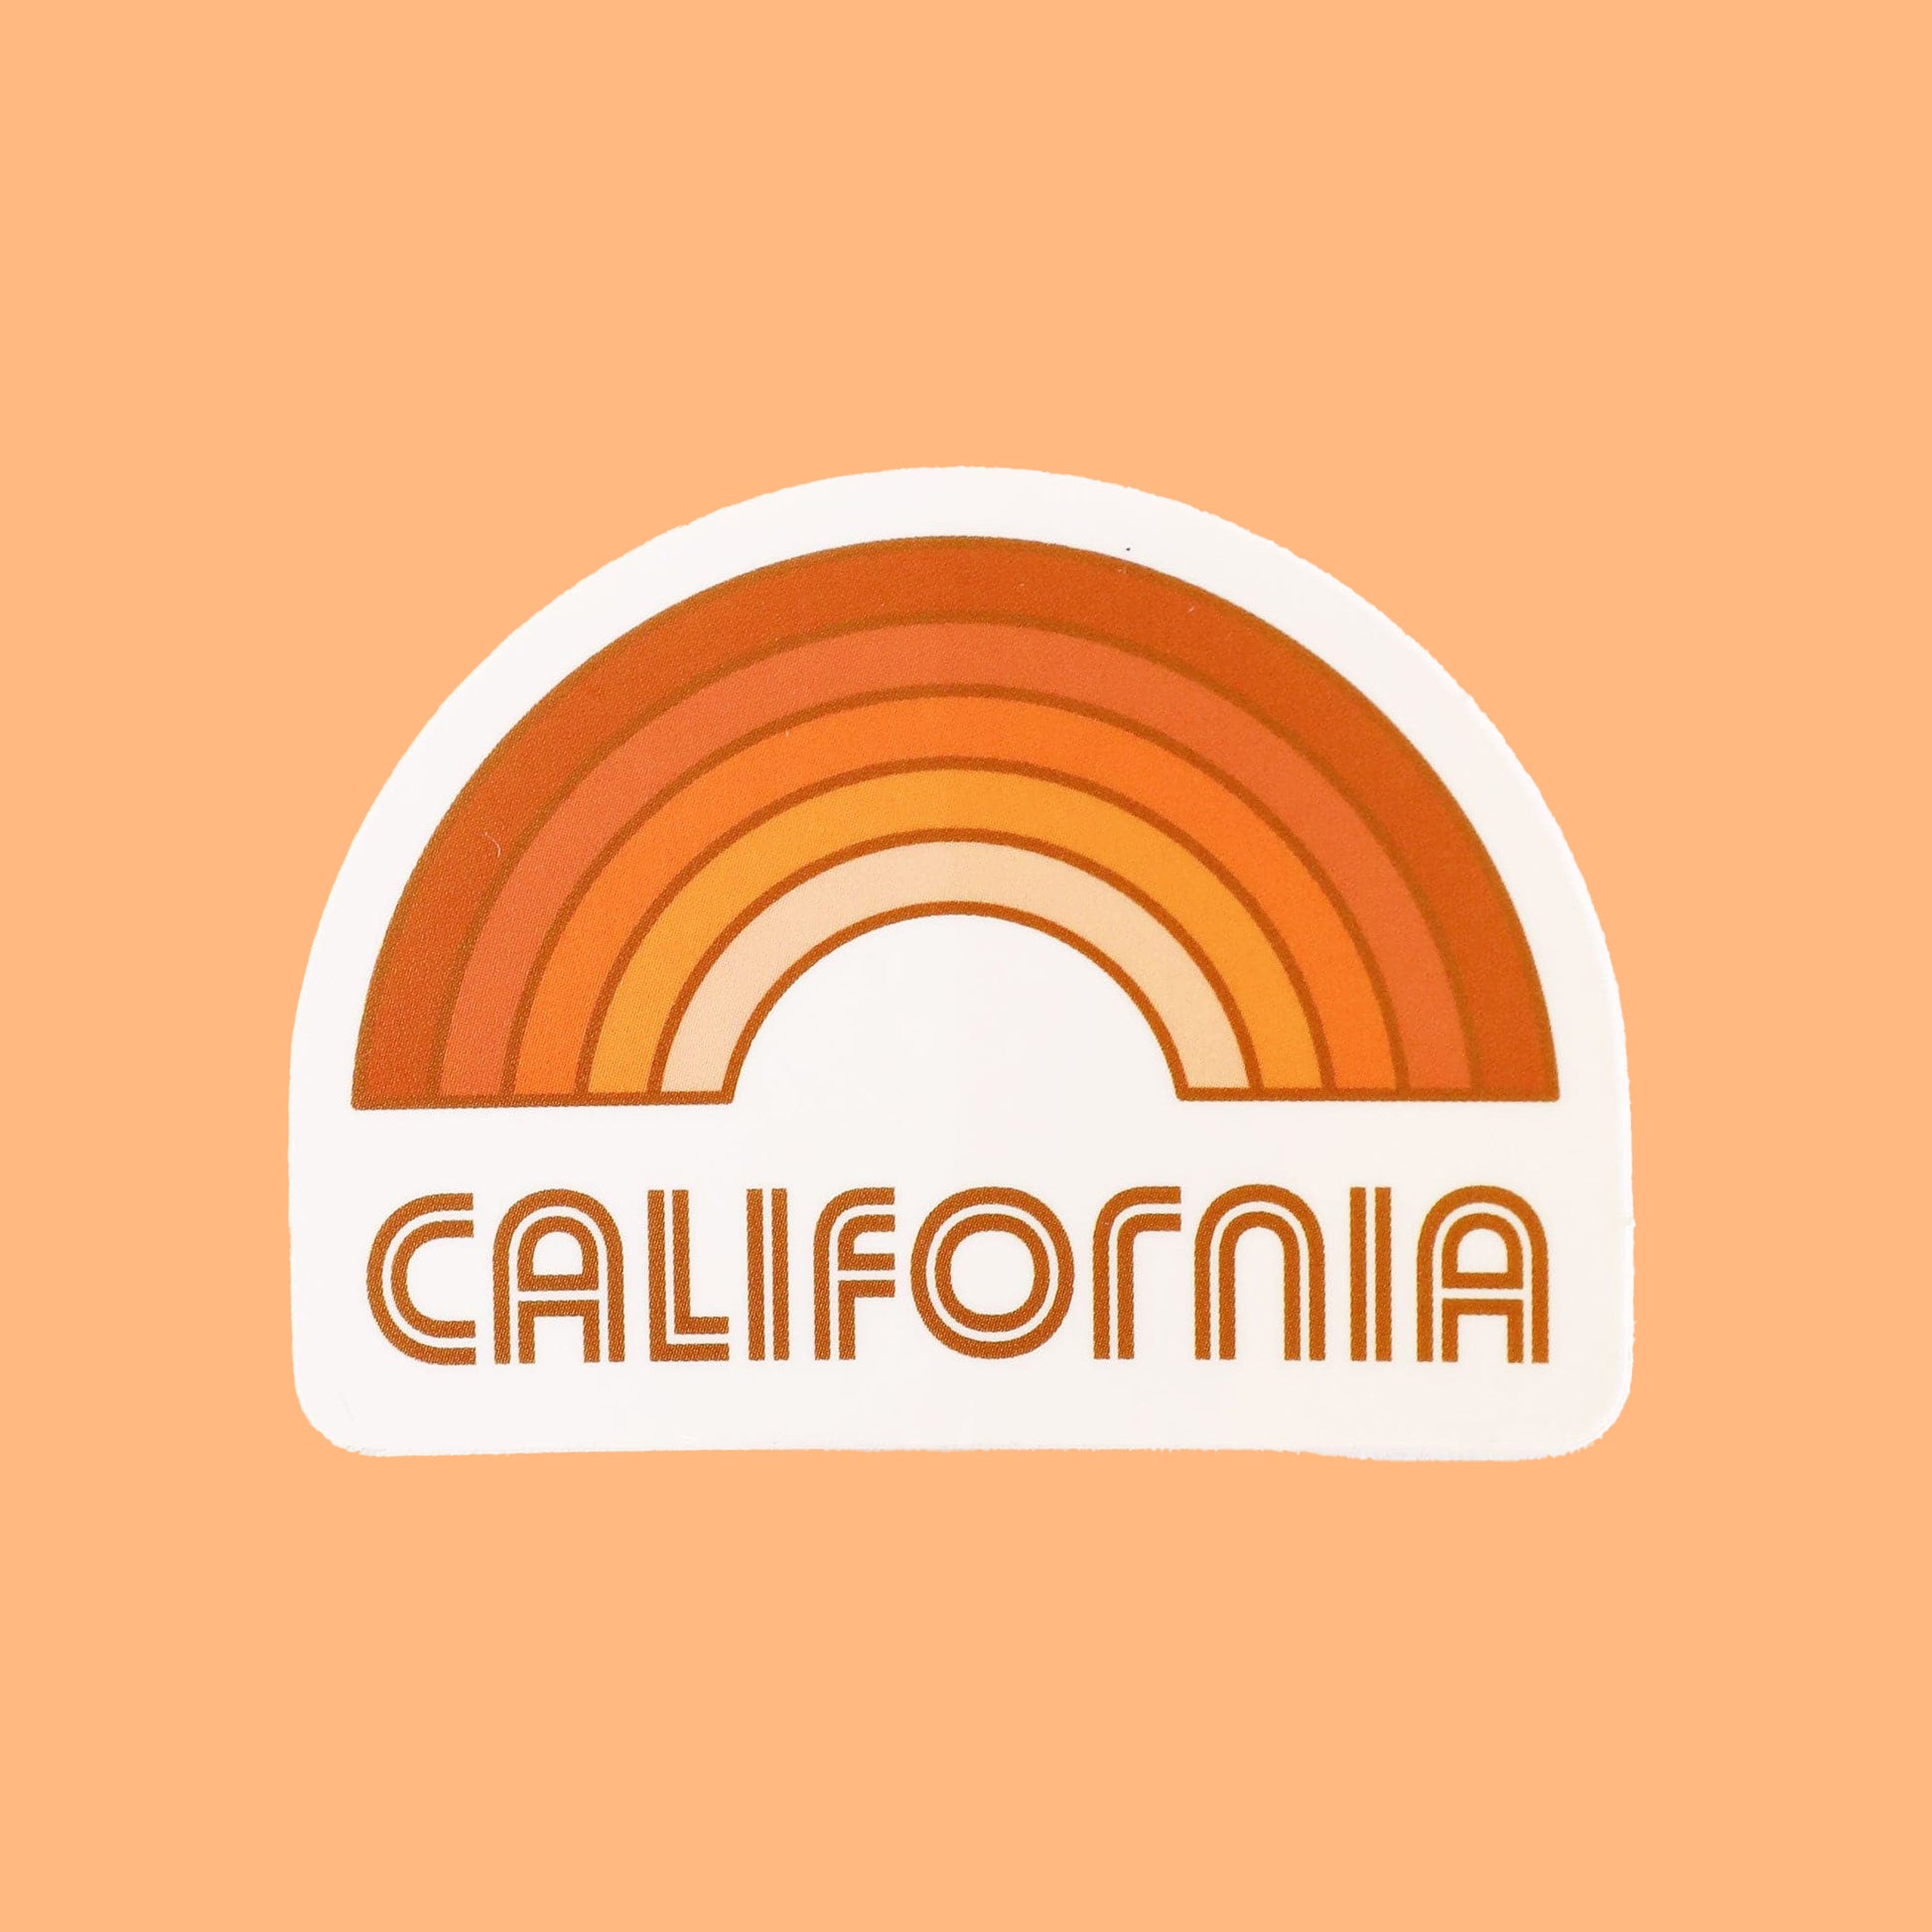 A rainbow sticker made up of different shades of orange and "California" written in orange letters on the bottom underneath the rainbow graphic.